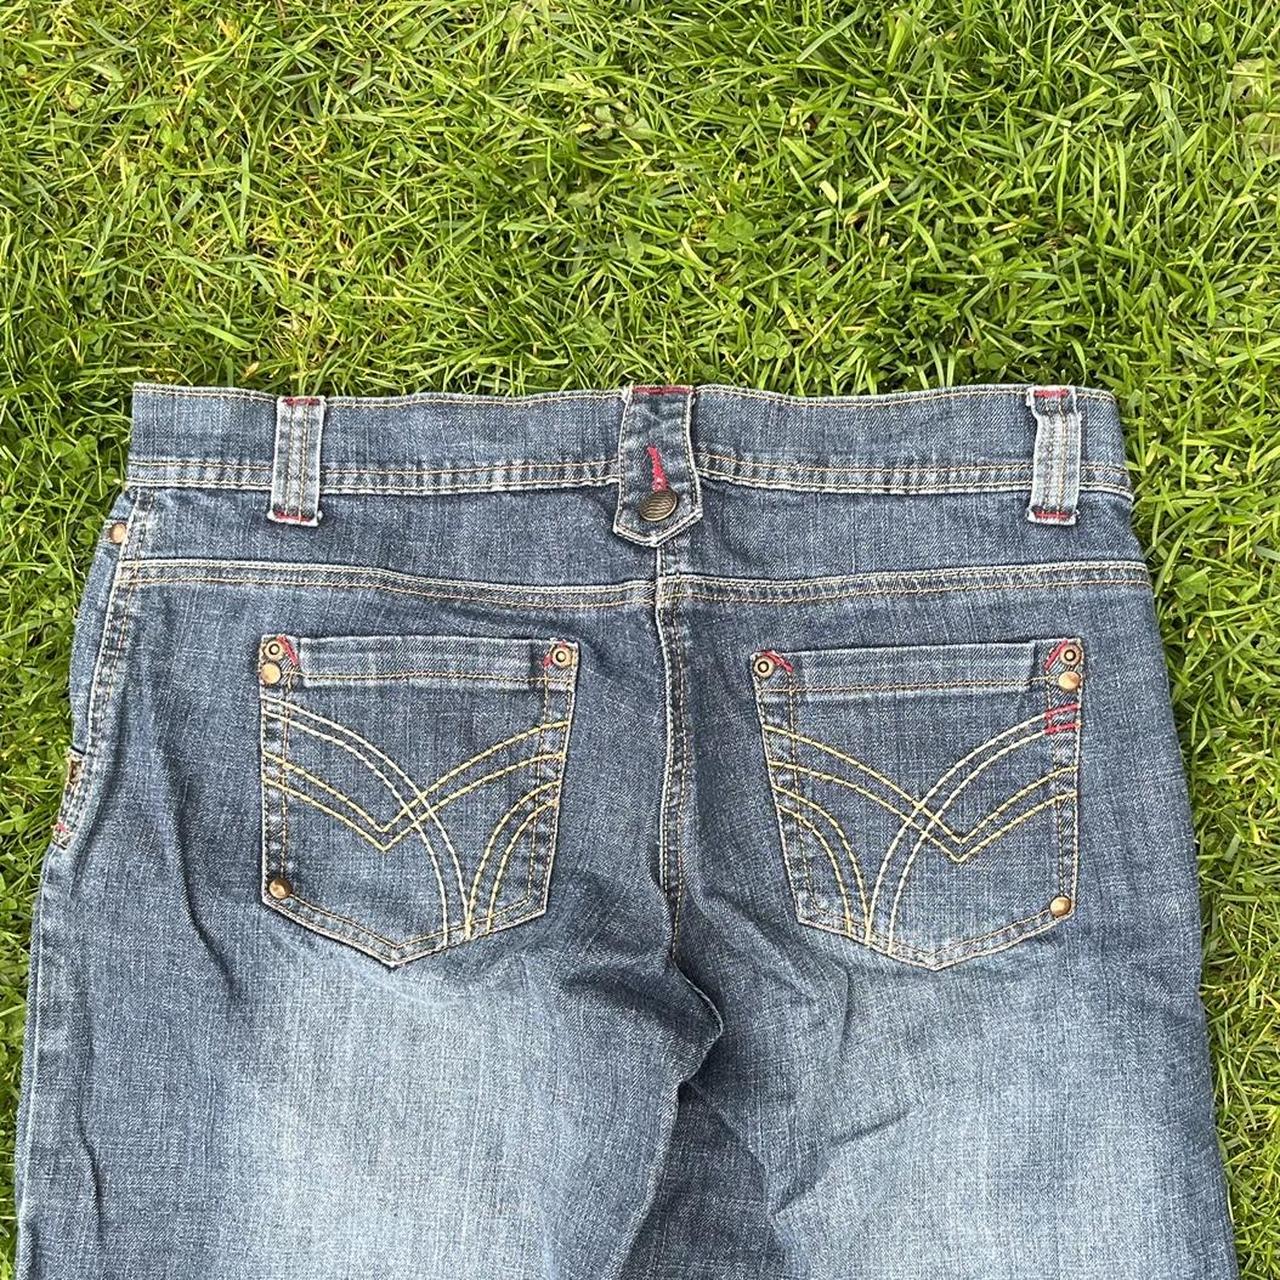 90s vibe low-waisted jeans Red stitching and... - Depop